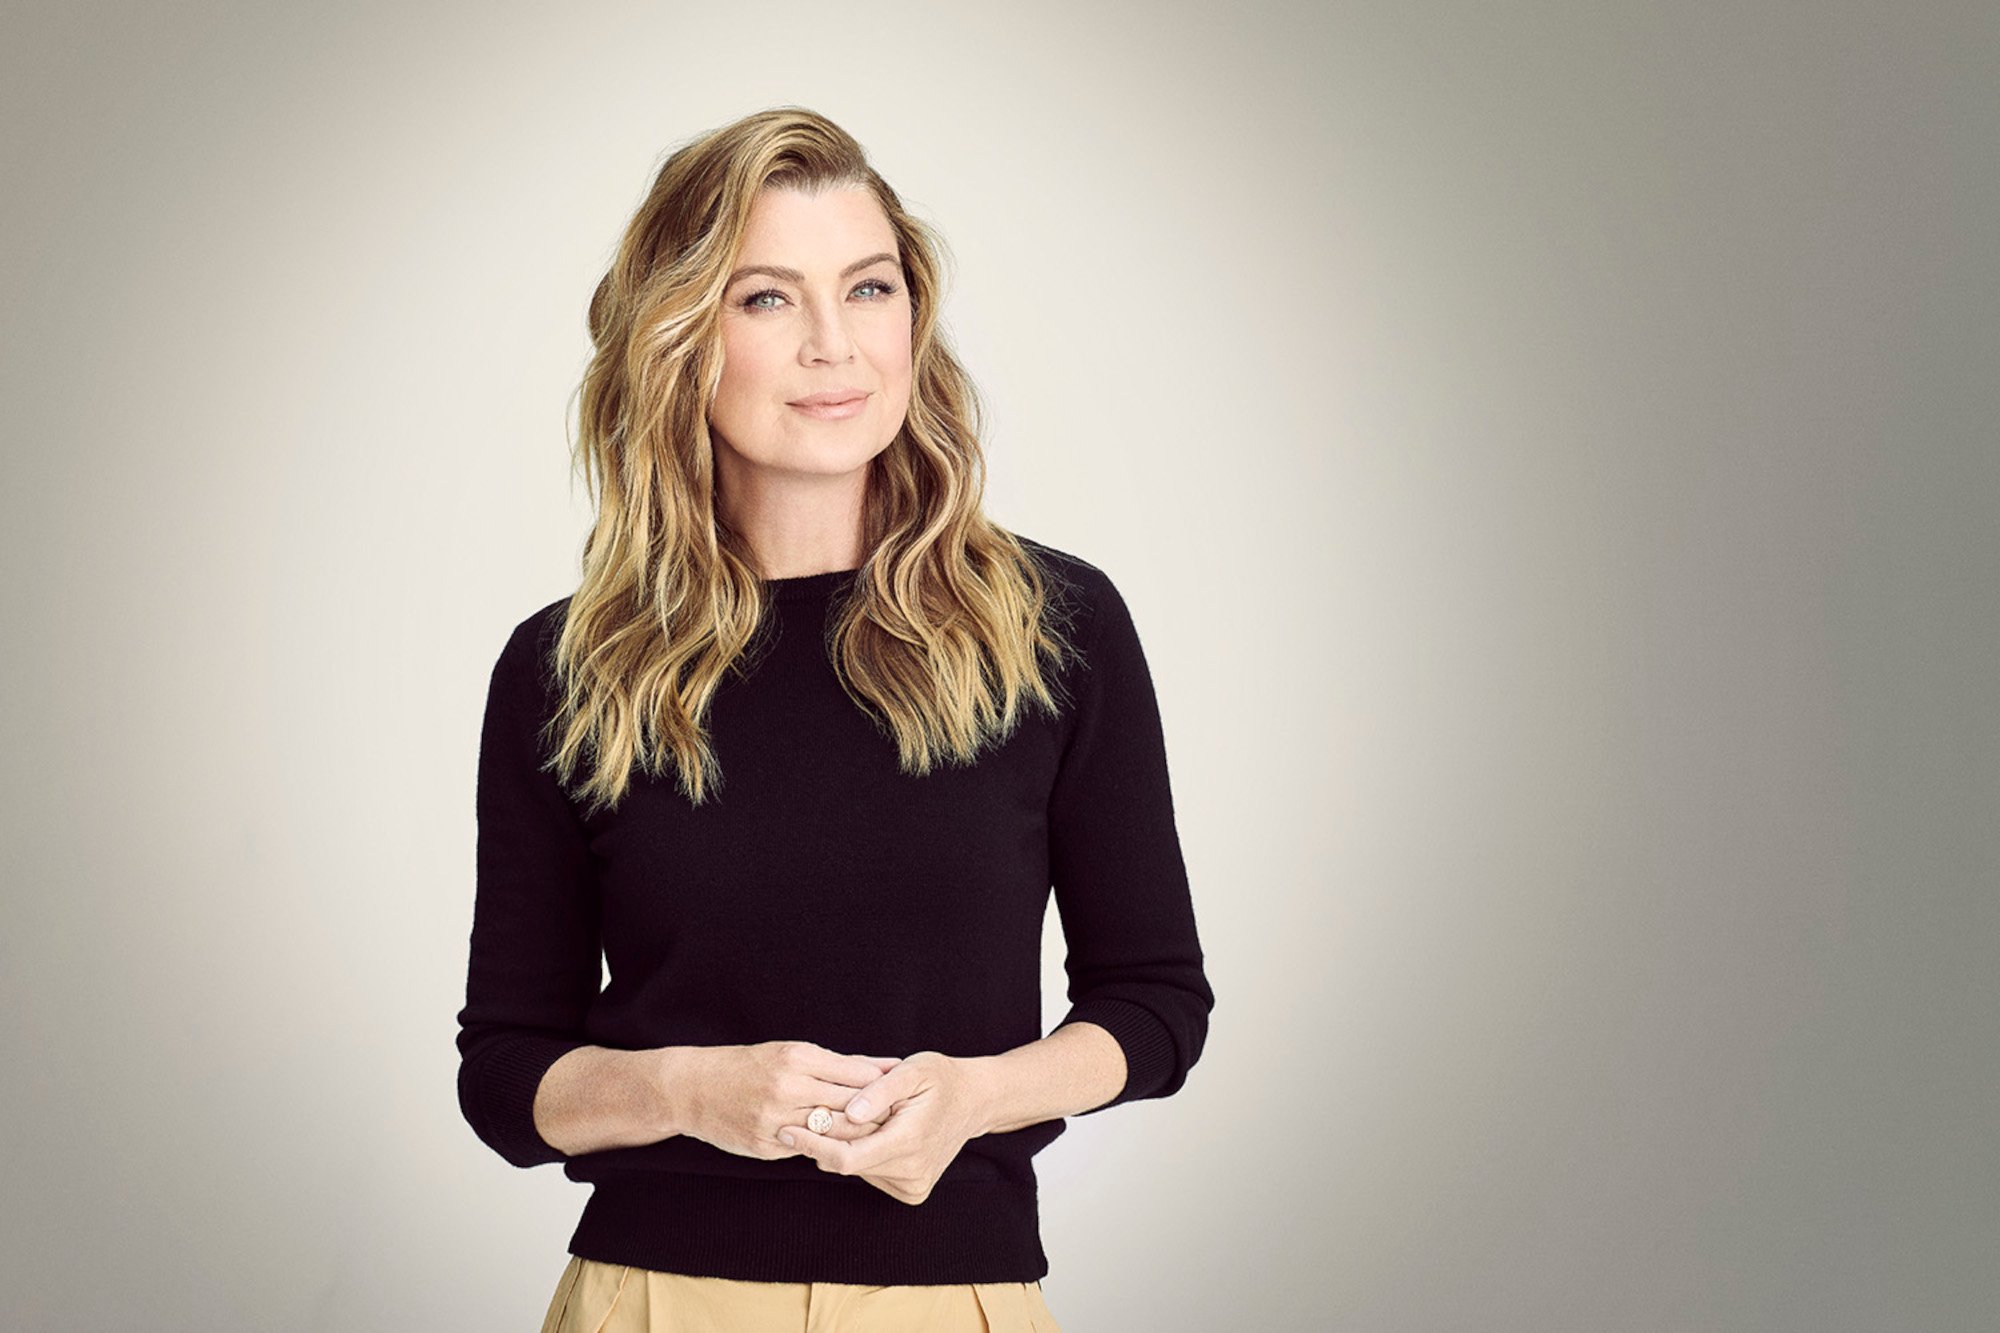 'Grey's Anatomy' star Ellen Pompeo. She's wearing a black shirt, beige pants, and standing in front of a white backdrop. She's smiling at the camera, and her blonde hair is down.